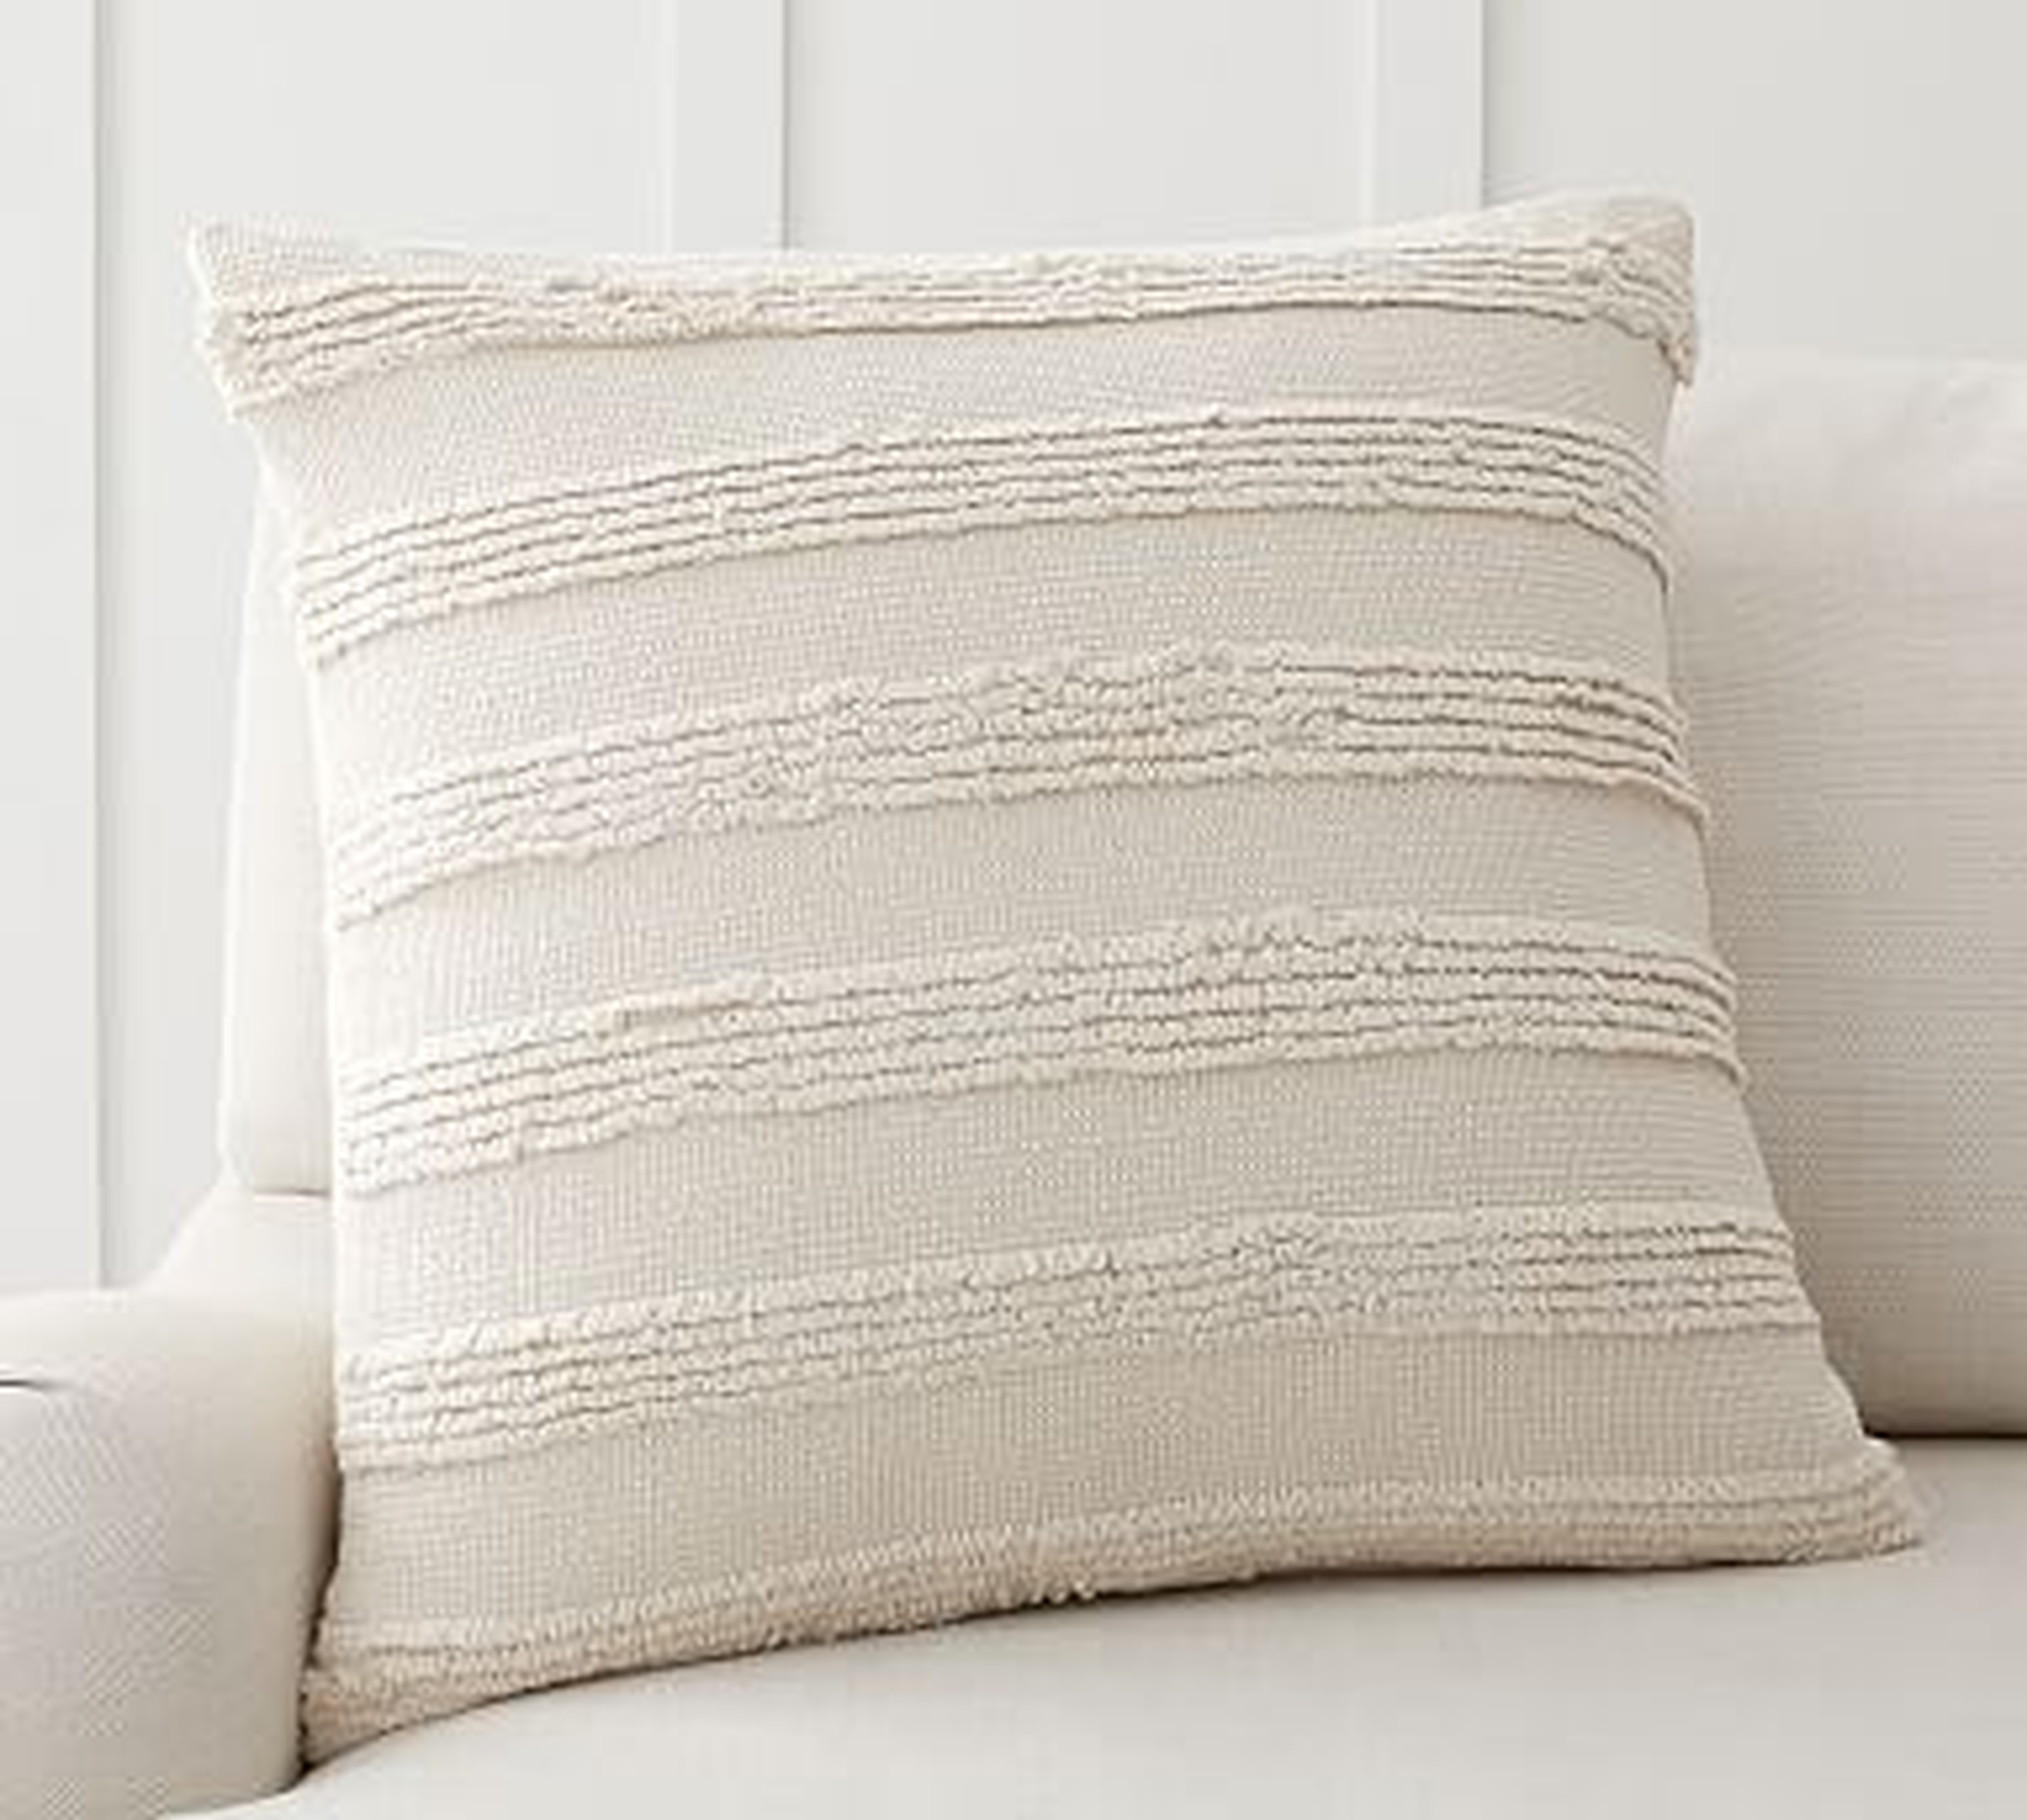 Damia Handwoven Textured Pillow Cover, 22", Ivory Multi - Pottery Barn